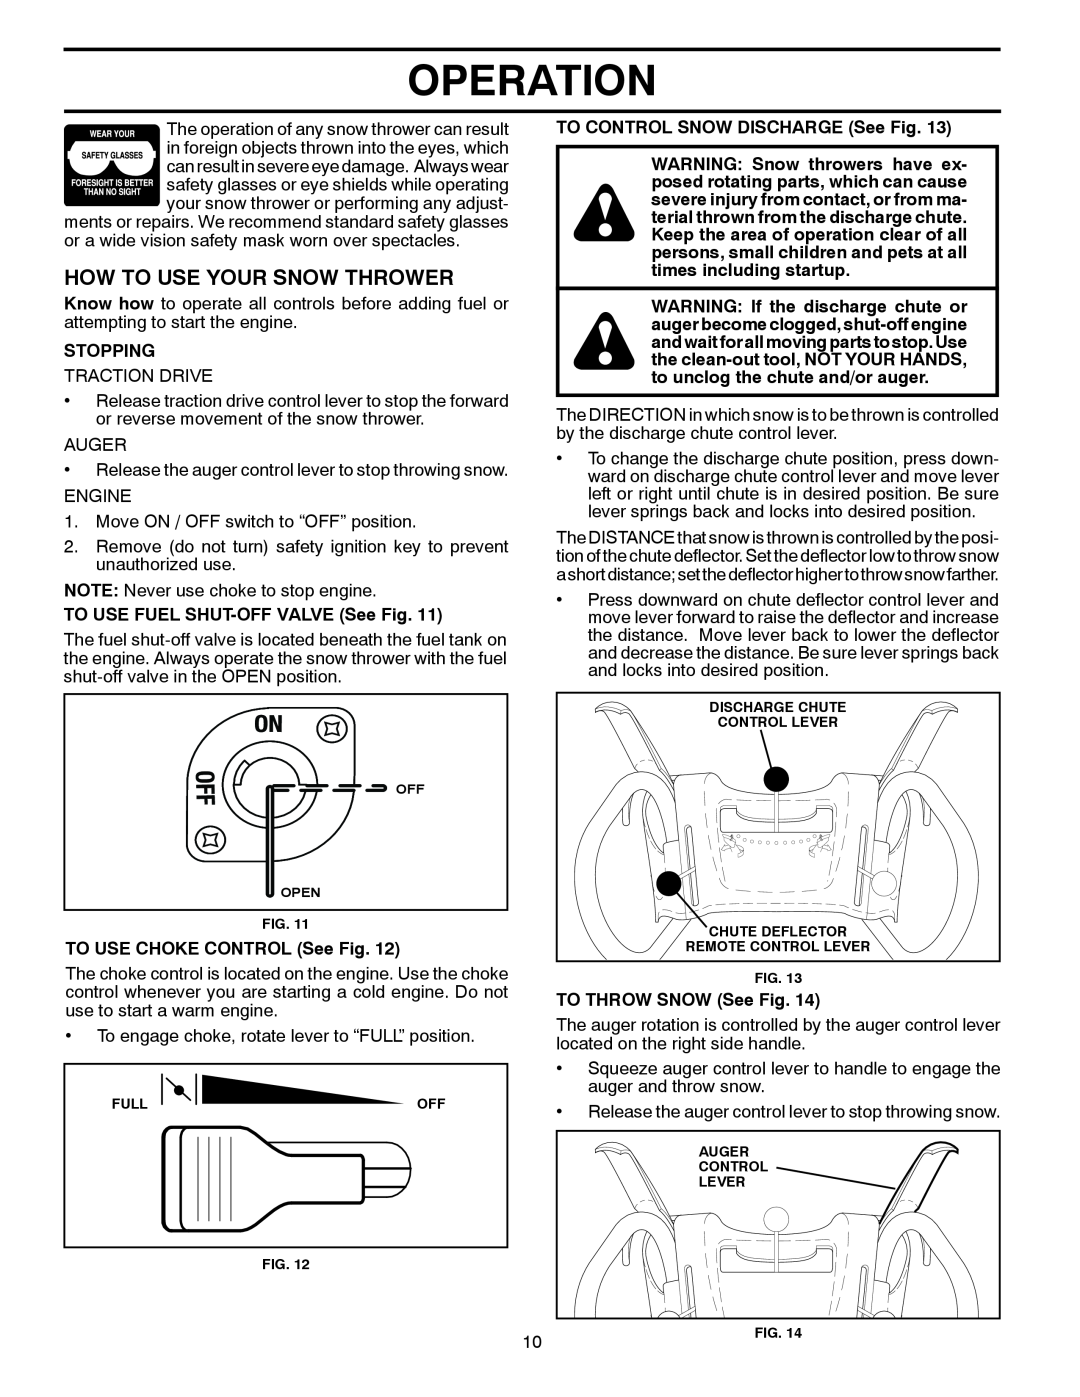 Poulan PP1330ES, 428553, 96192003200 How To Use Your Snow Thrower, Operation, Stopping, TO USE FUEL SHUT-OFF VALVE See Fig 